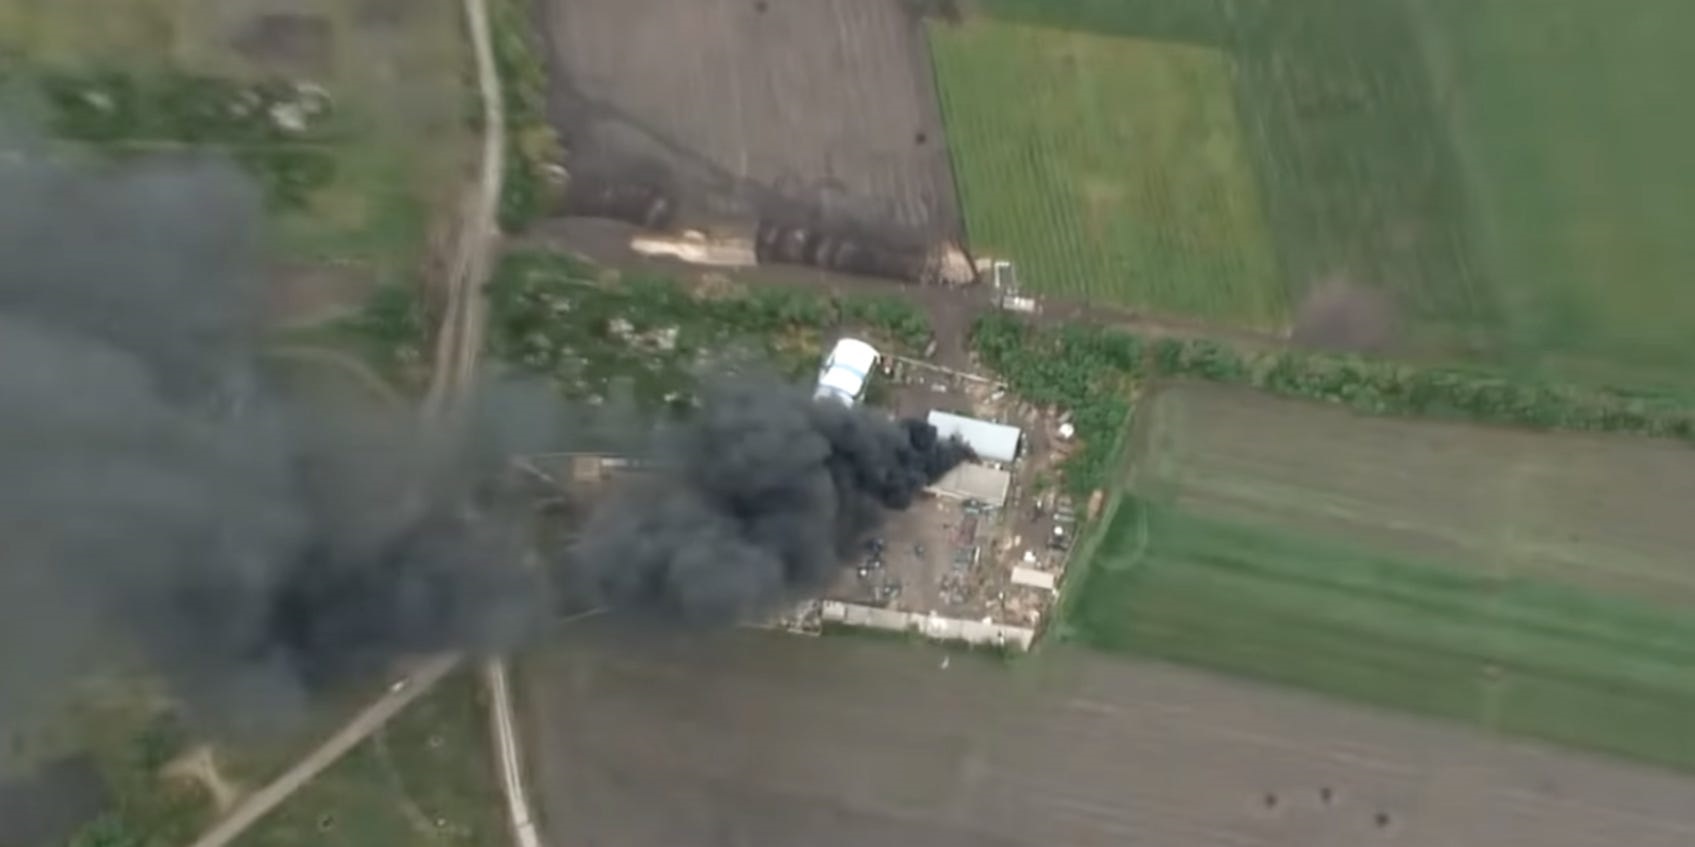 An aerial video still from the Ukrainian army showing a dark plume of smoke coming from a rural building. It has been identified as being in Kharkiv Oblast.